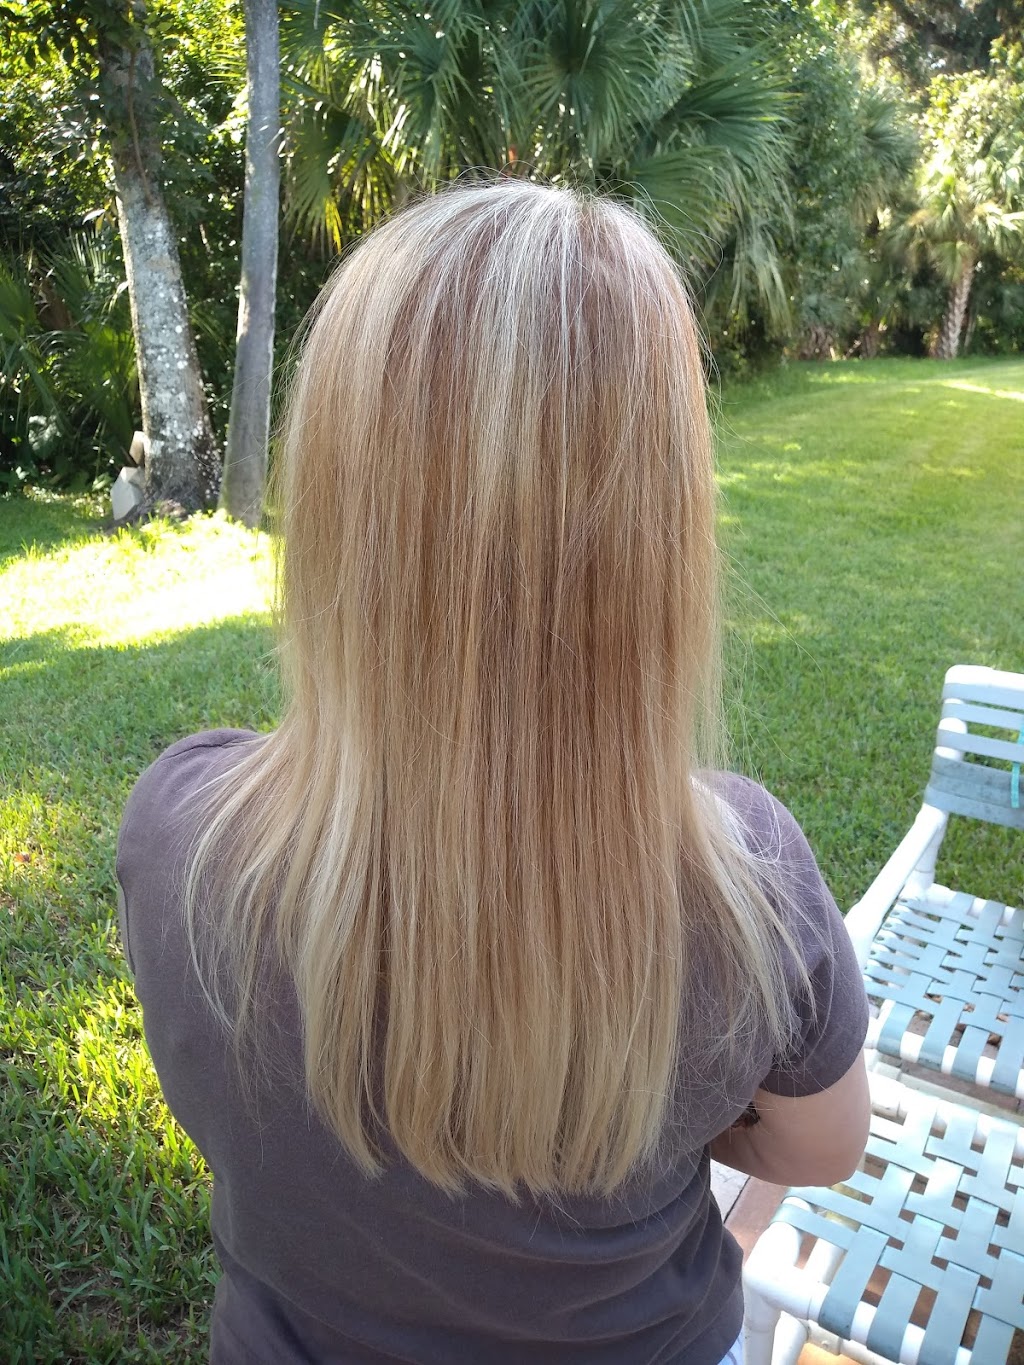 Haircuts By Denise | 901 Indian River Blvd W, Edgewater, FL 32132 | Phone: (386) 871-3188